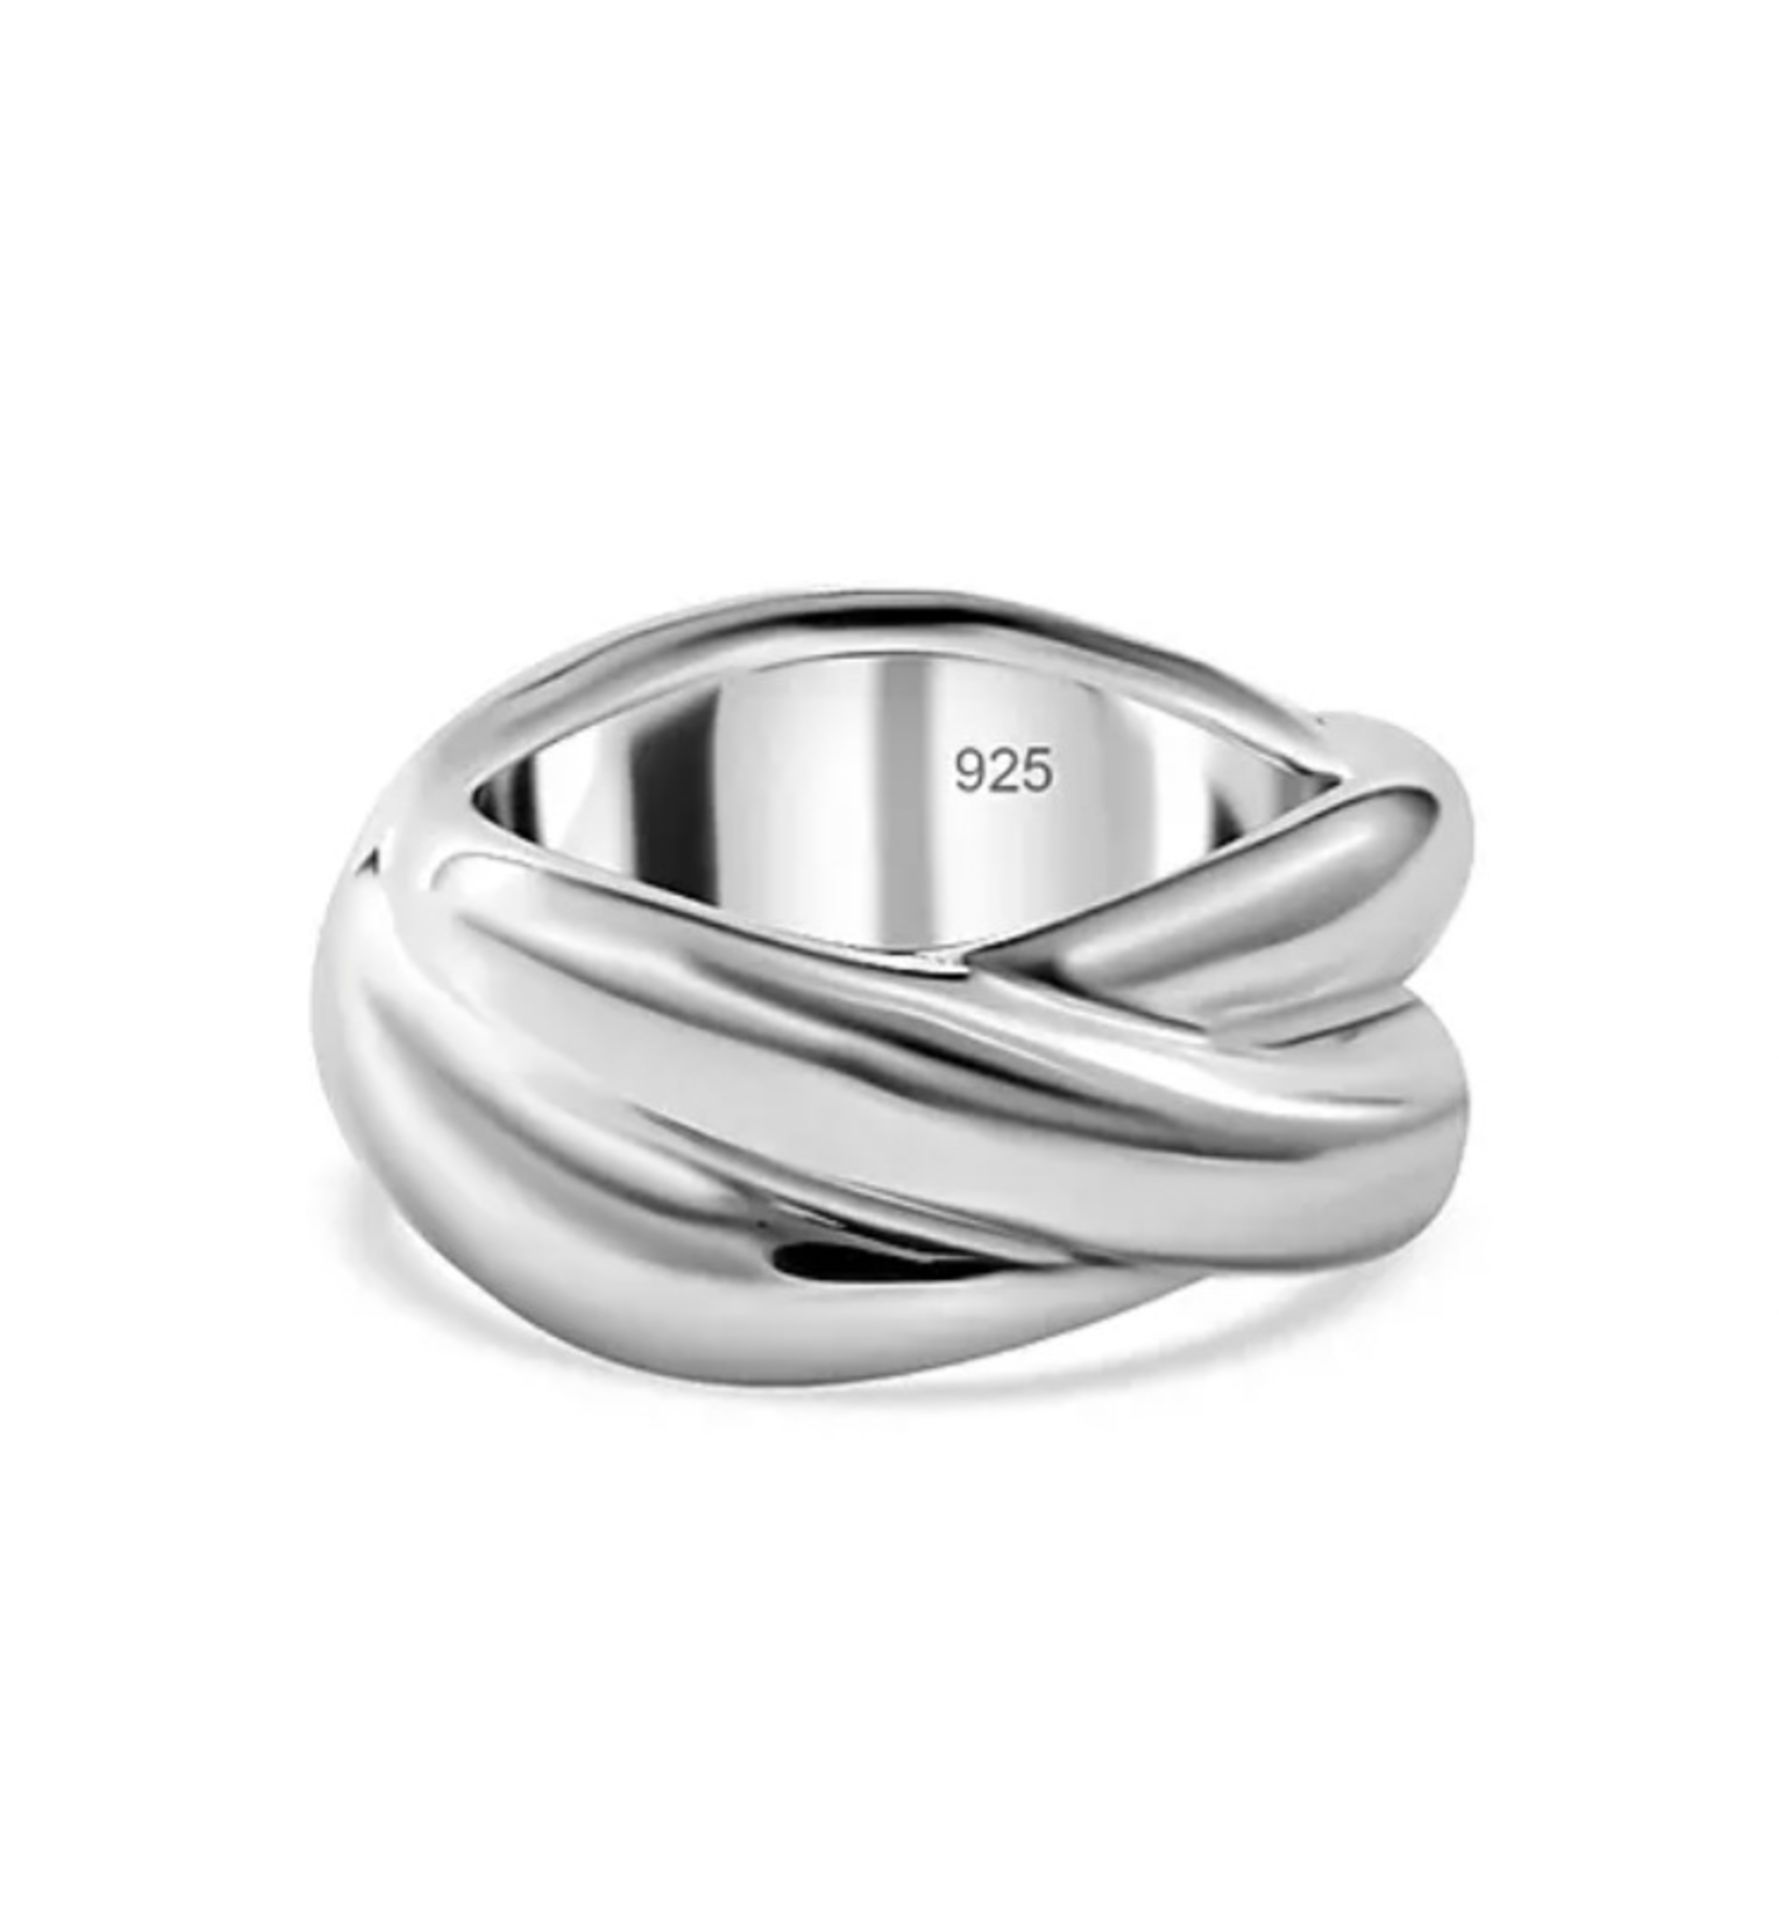 NEW! Sterling Silver Criss Cross Ring - Image 2 of 2